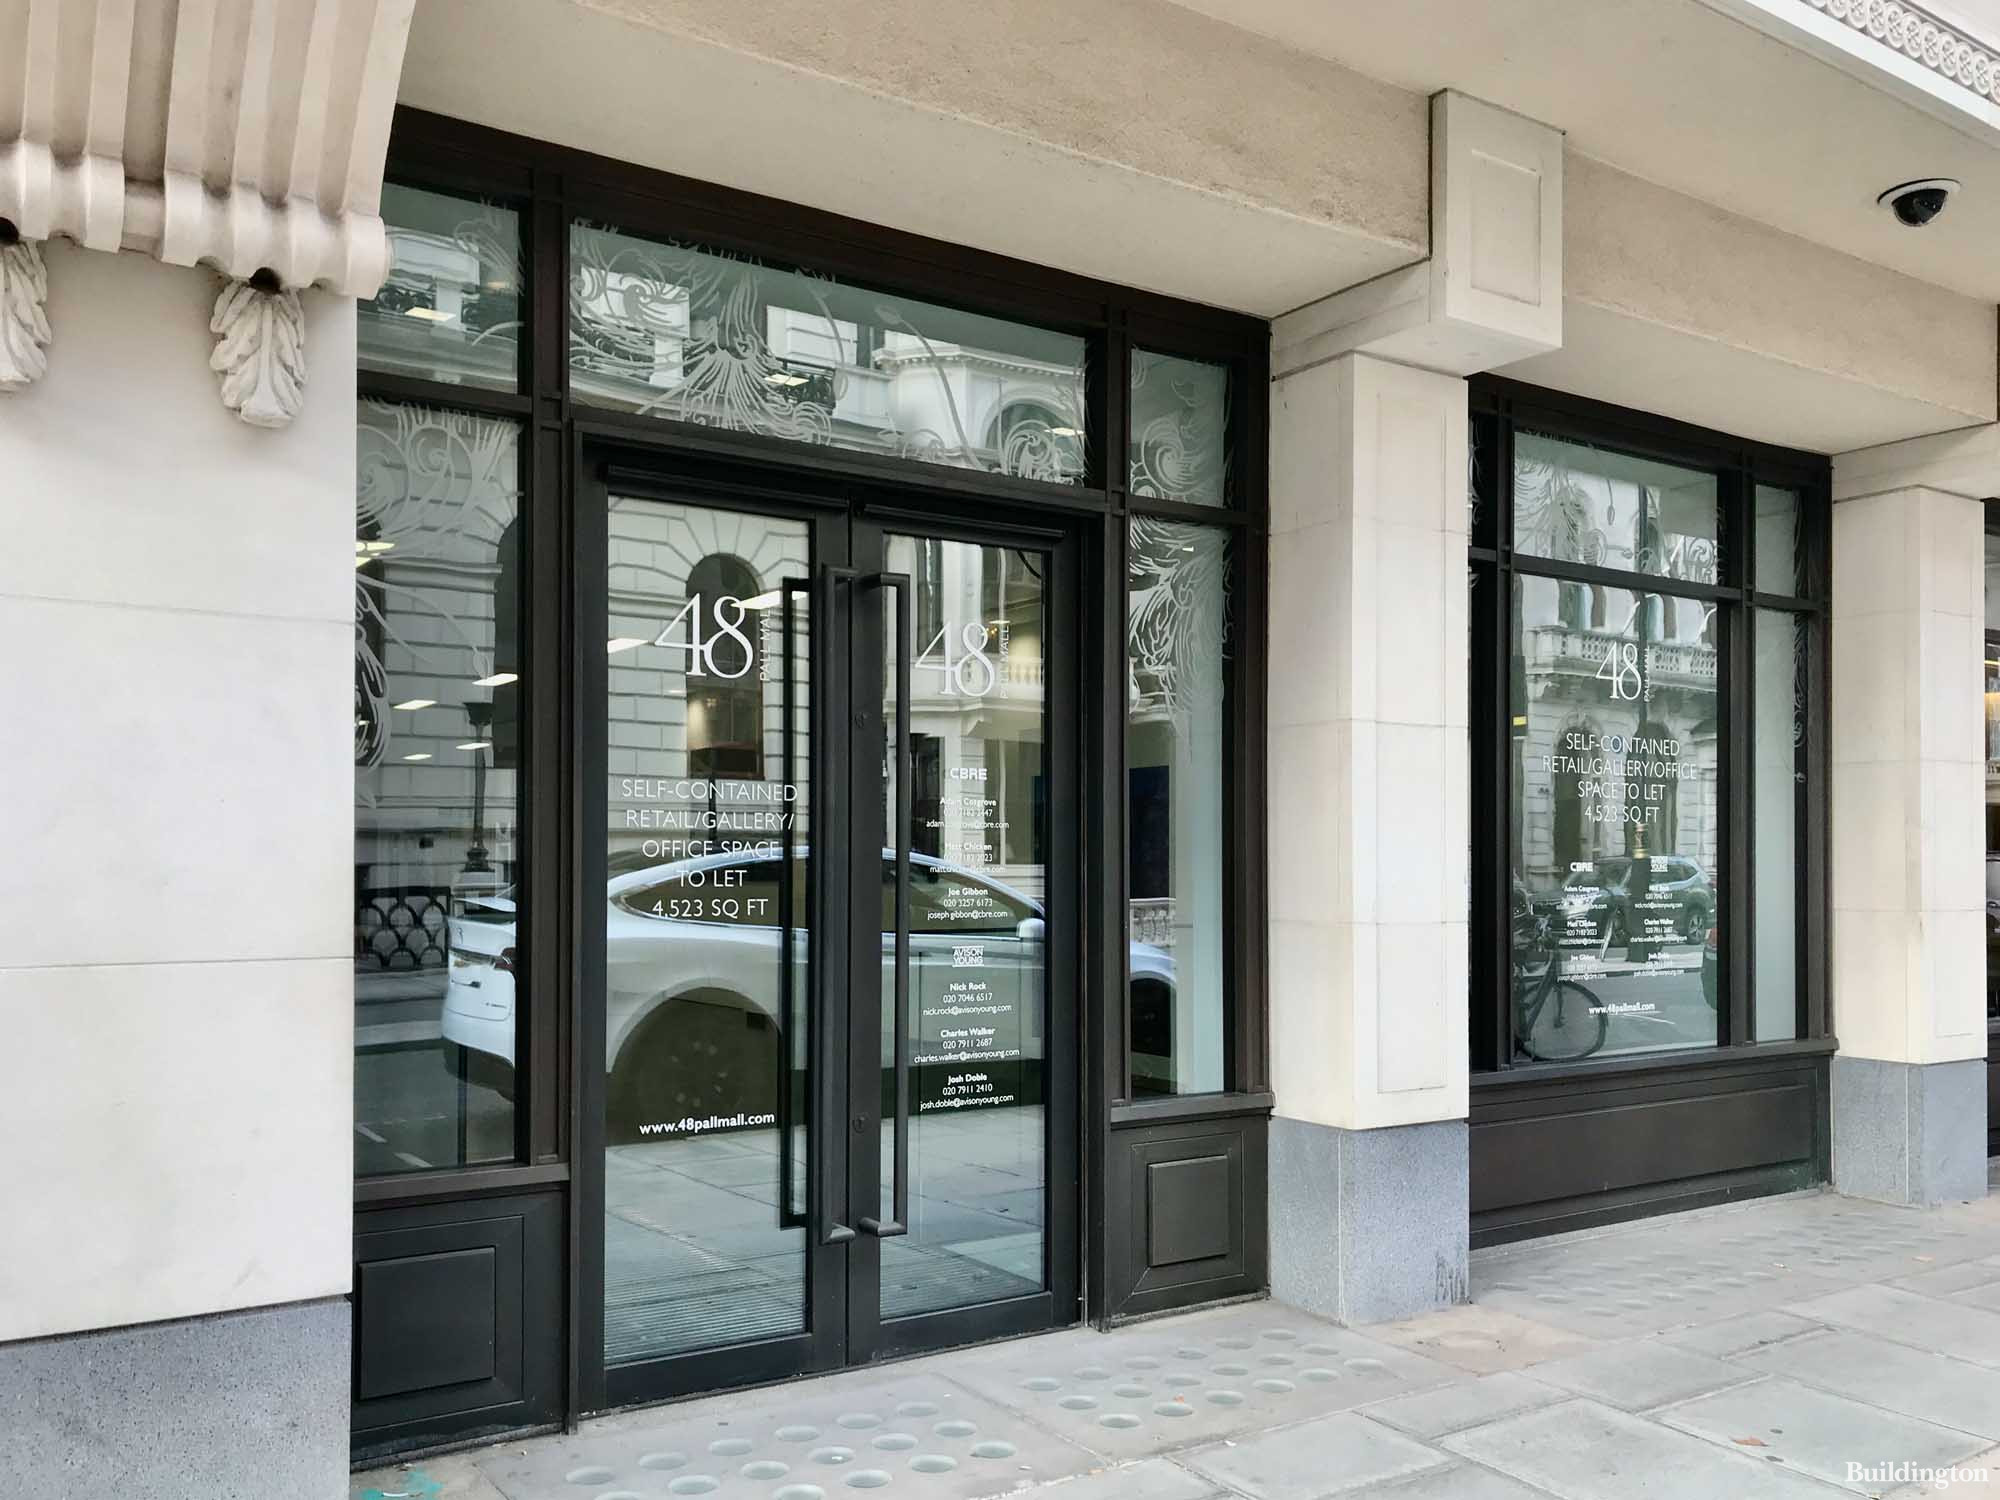 CBRE and Avison Young advertising self contained gallery/office space to let 4,523 at 48 Pall Mall.